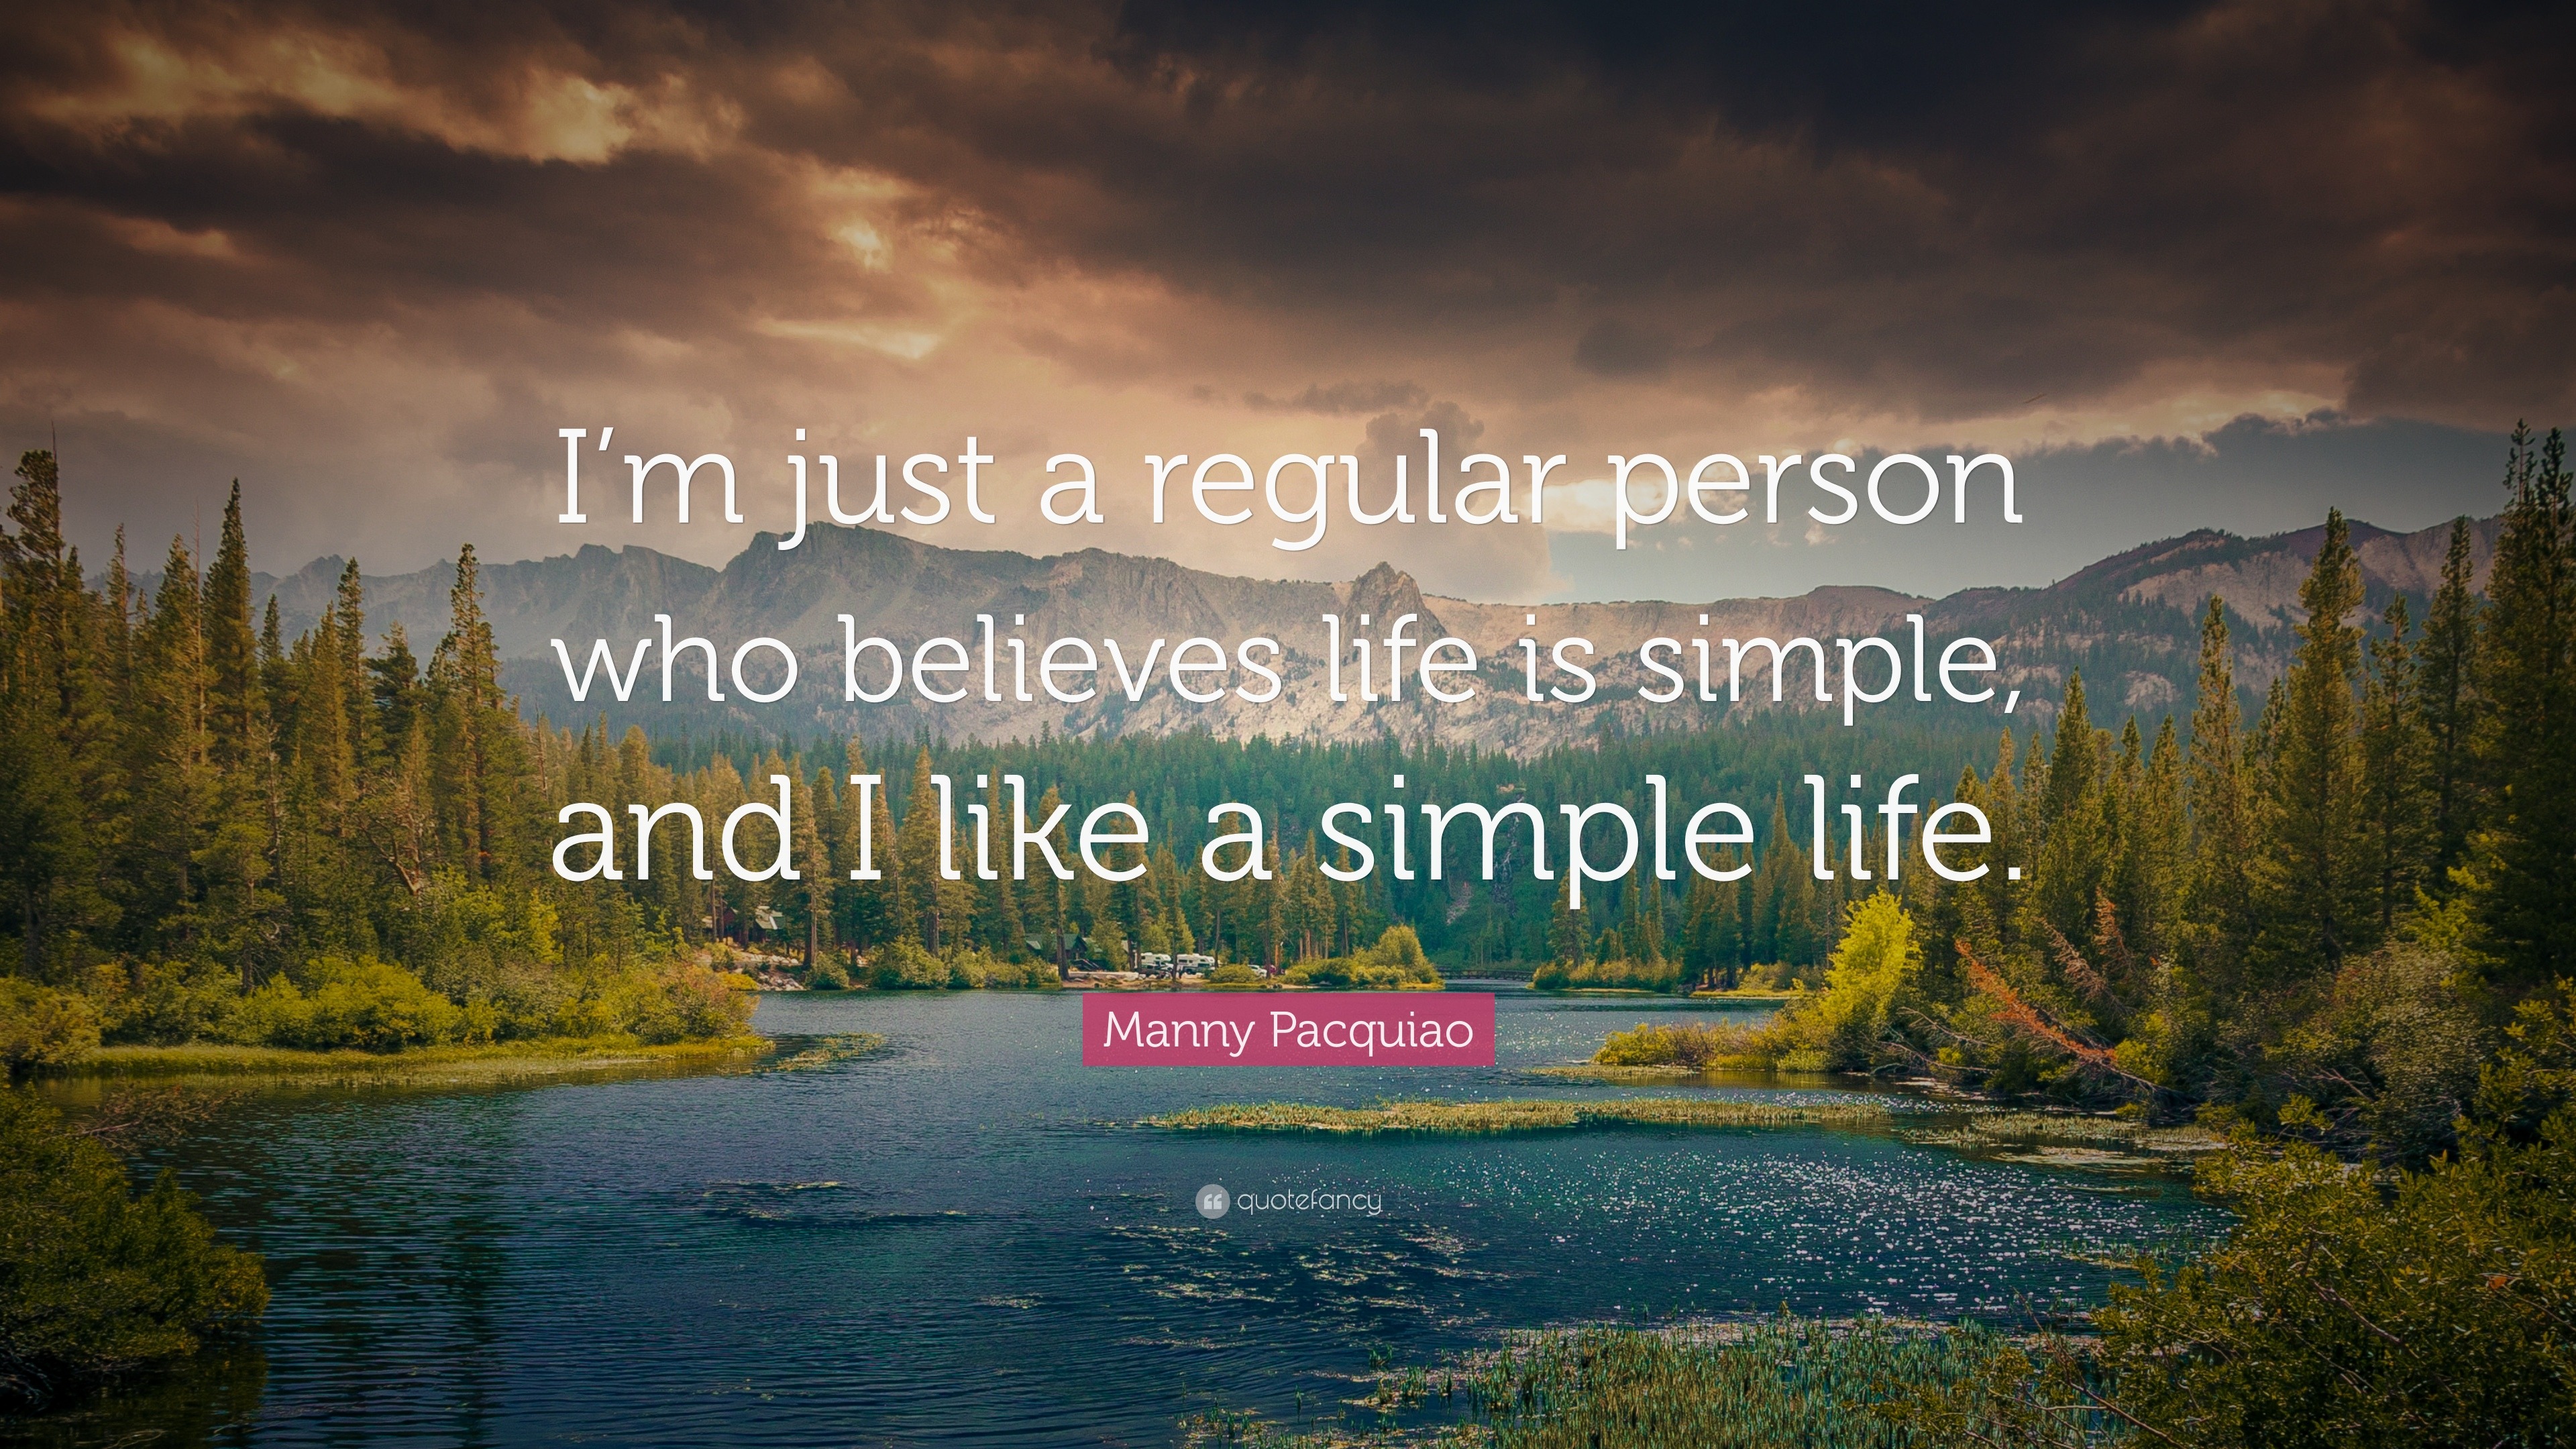 Manny Pacquiao Quote “I m just a regular person who believes life is